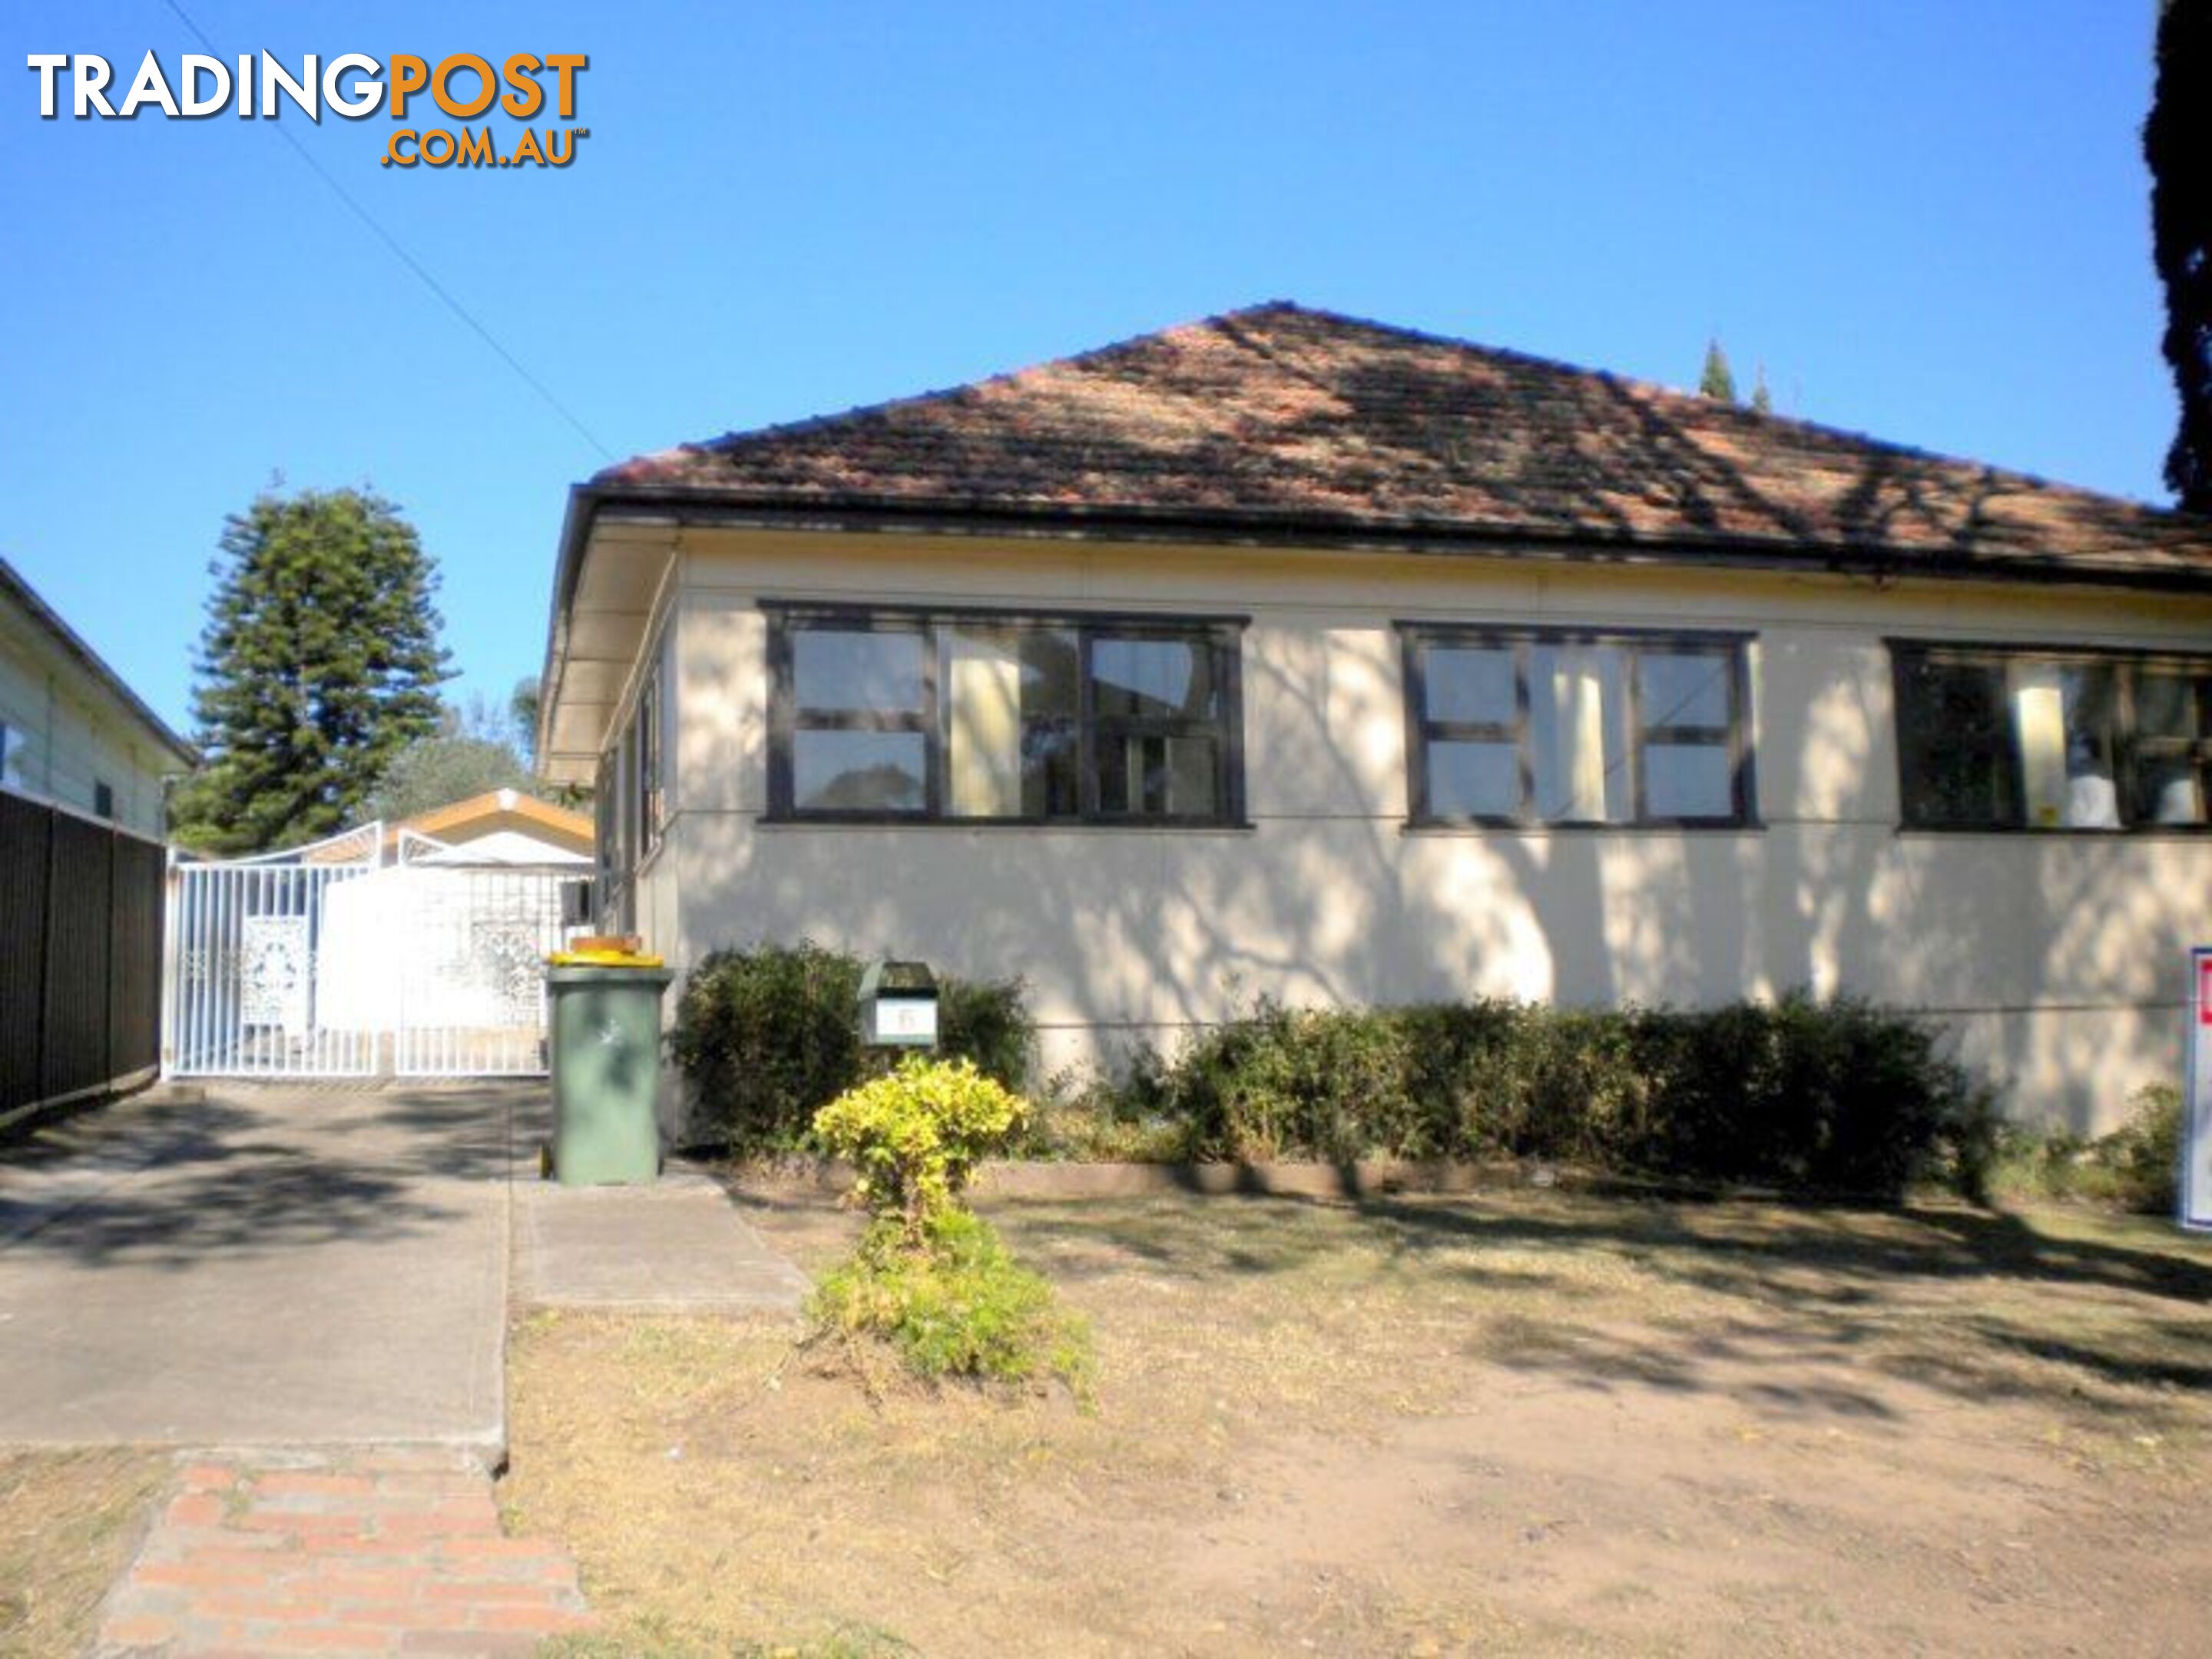 167 Rex Road GEORGES HALL NSW 2198